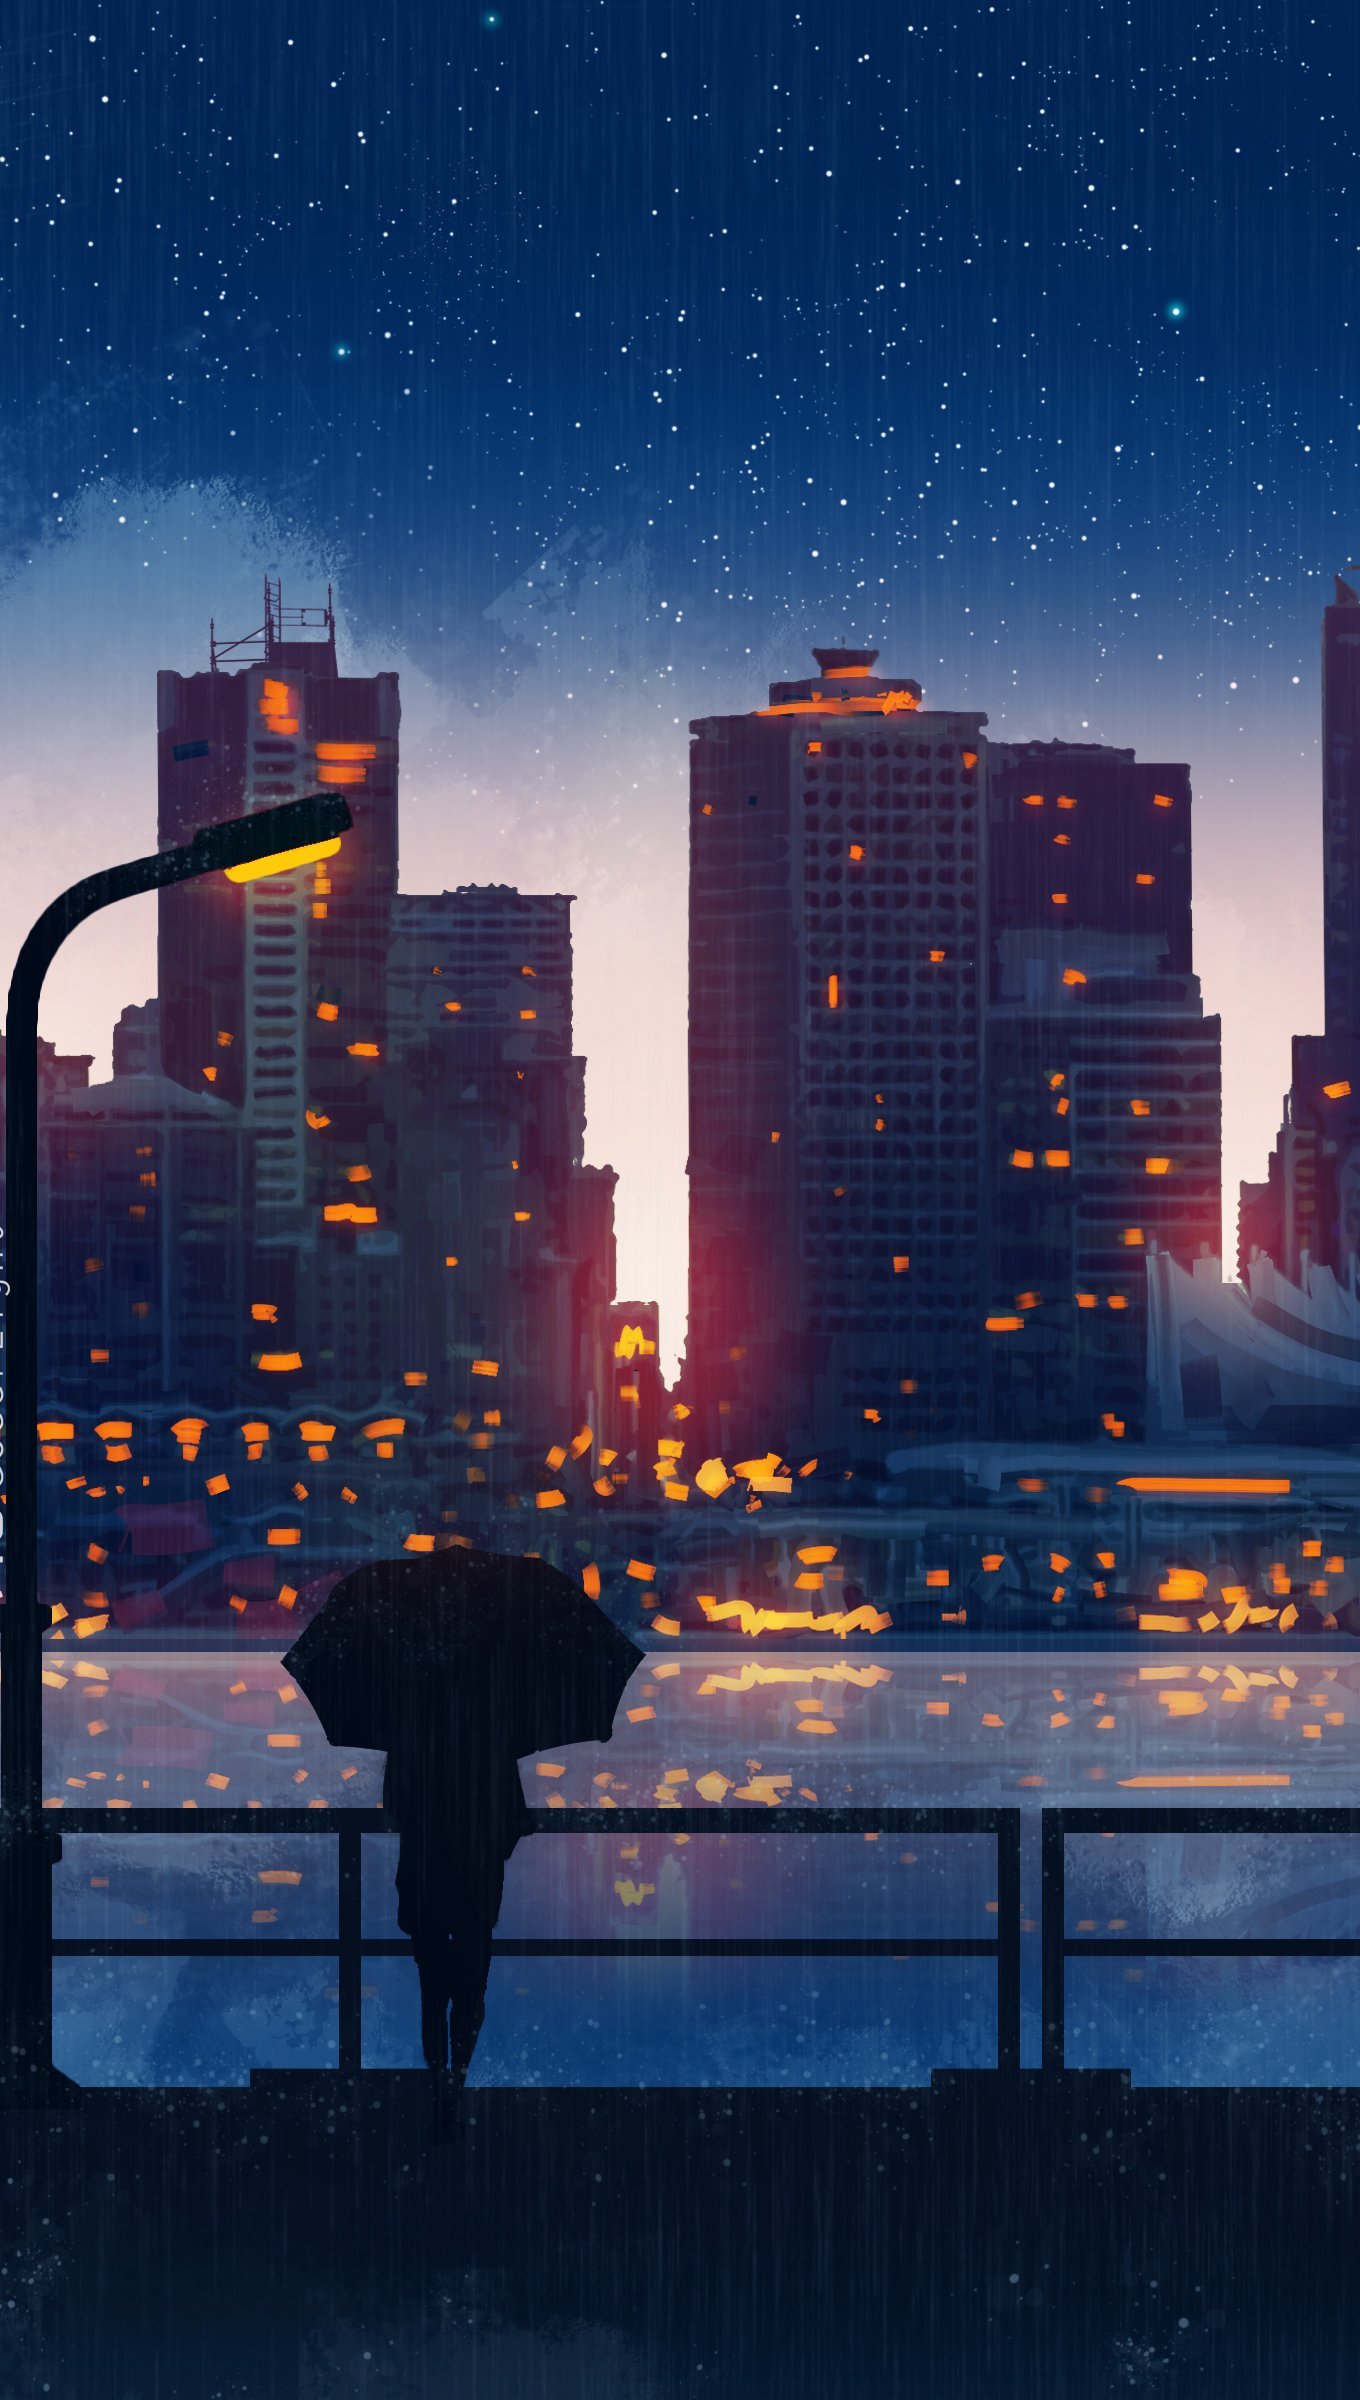 City at night anime style Wallpaper ID:5480